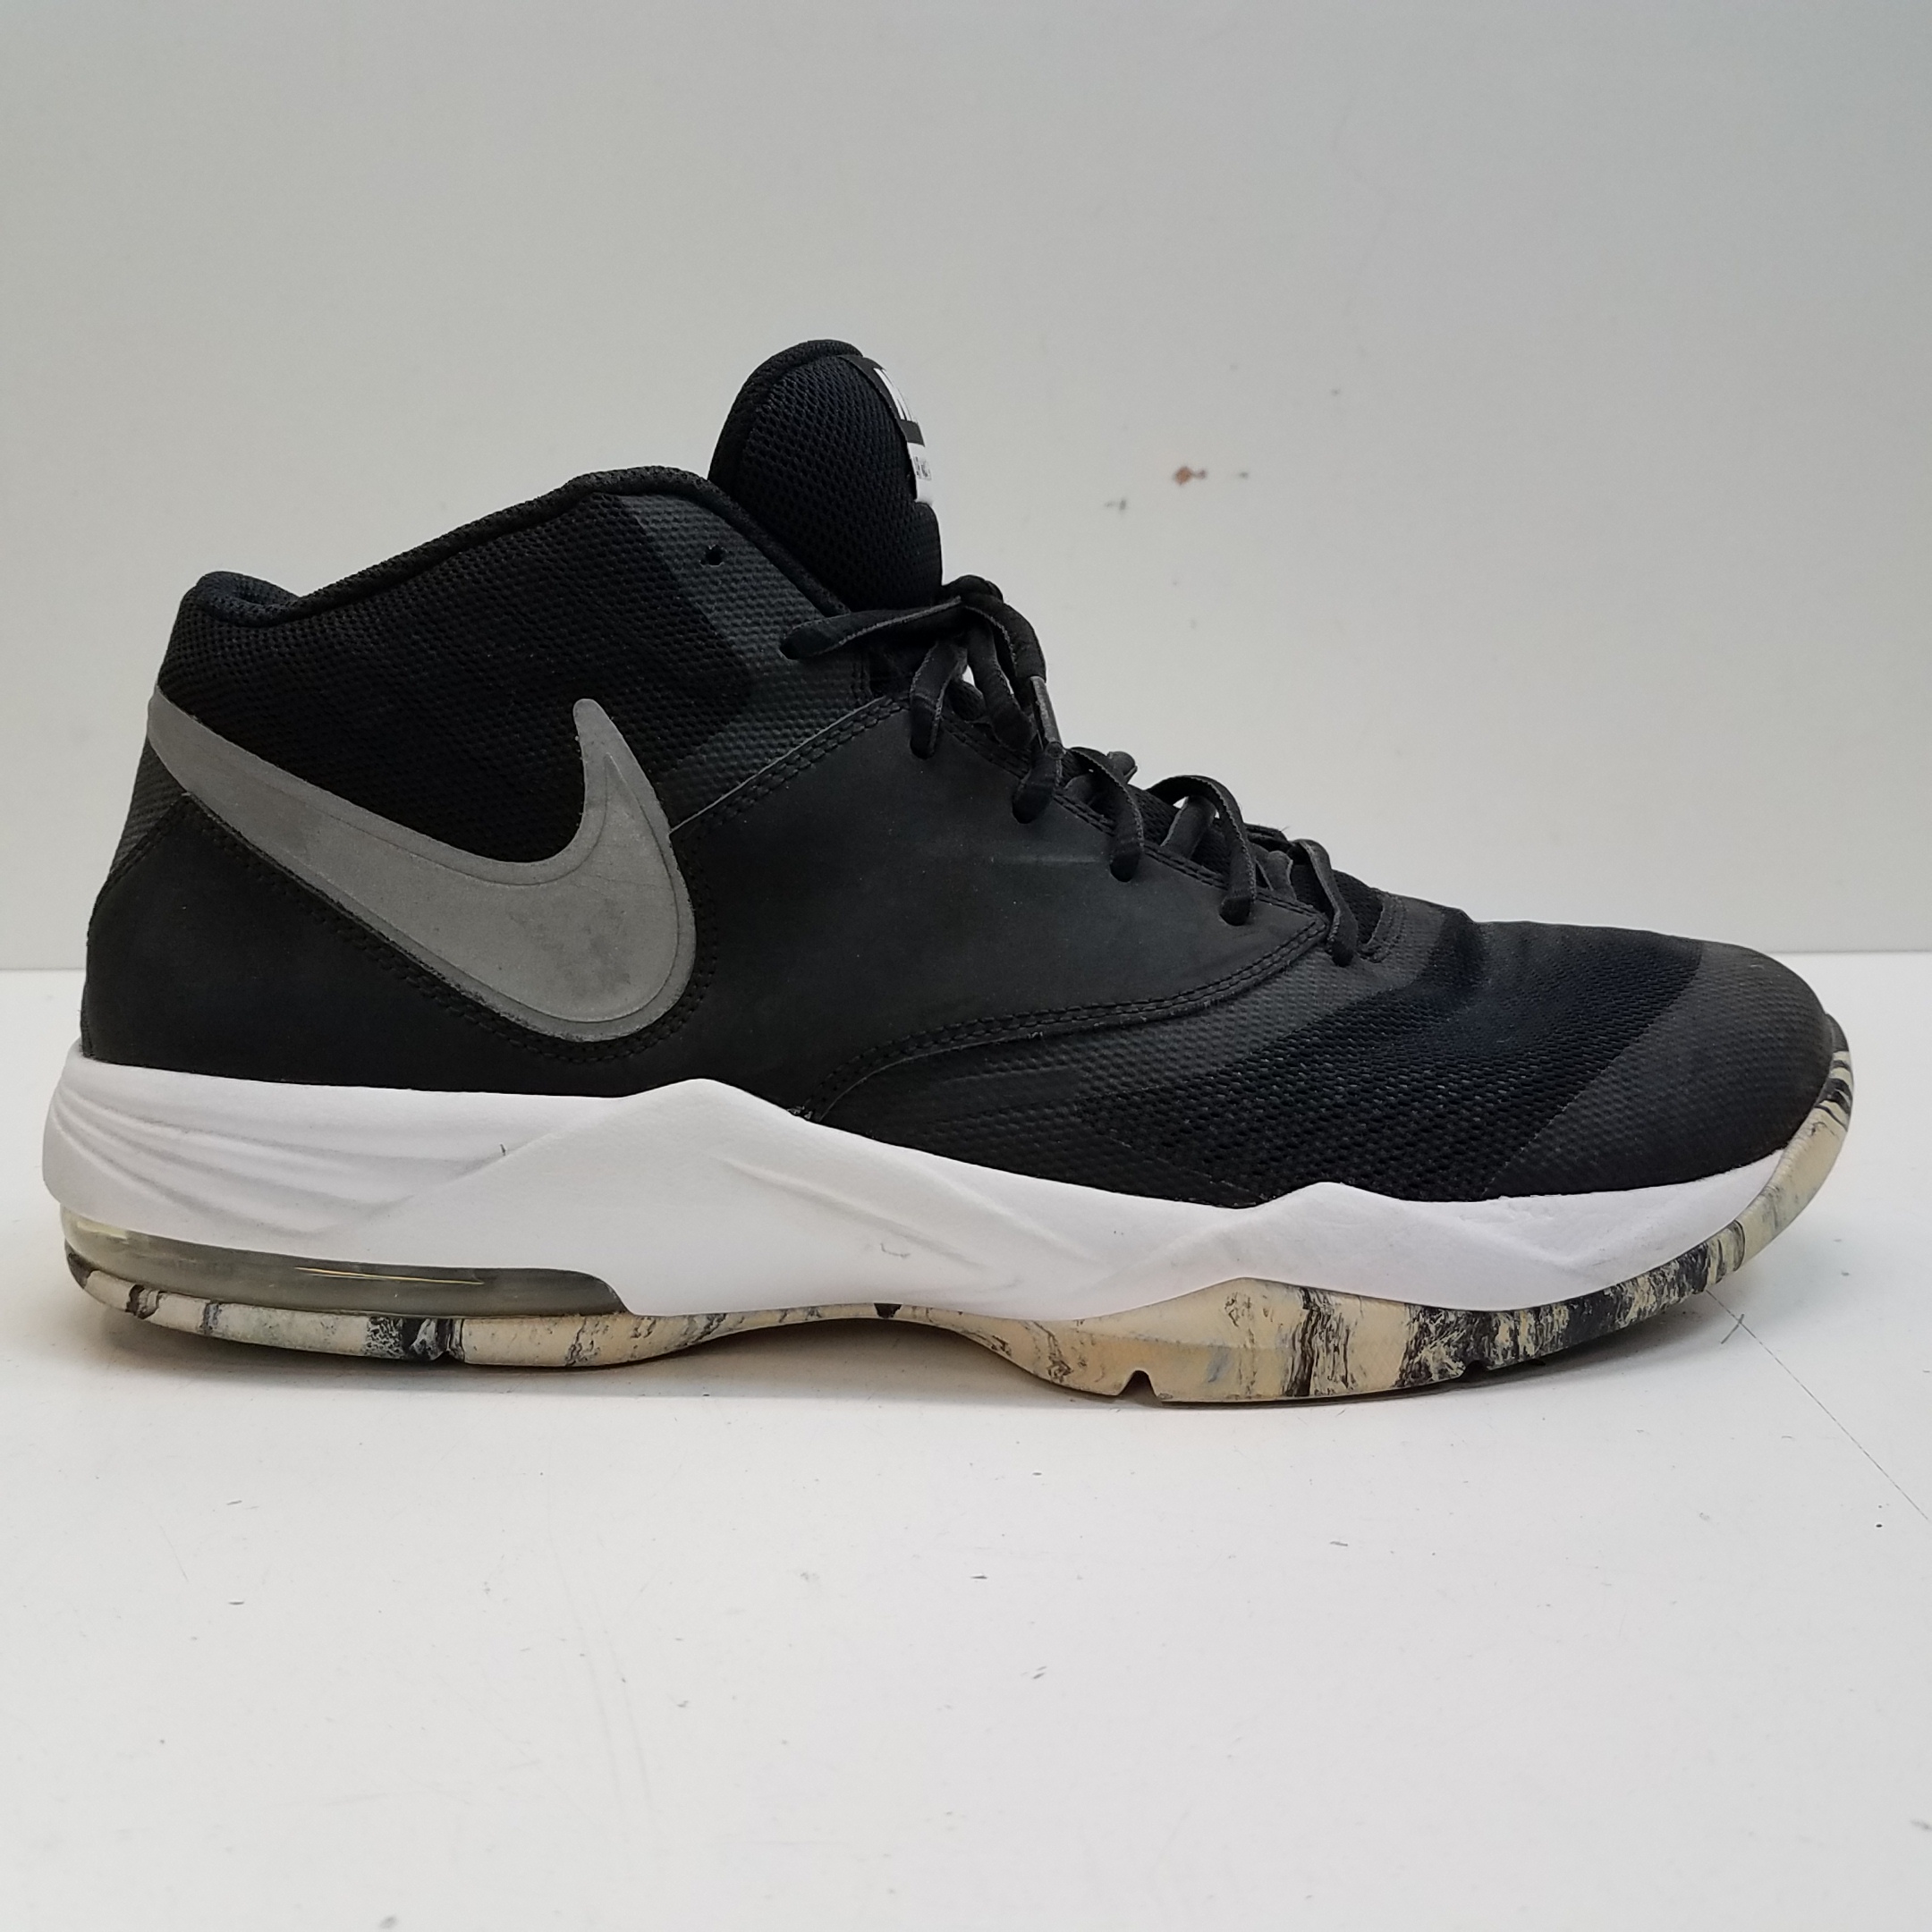 Ambiguo Velocidad supersónica poetas Buy the Nike Air Max Emergent Shoes Men's Size 12 | GoodwillFinds